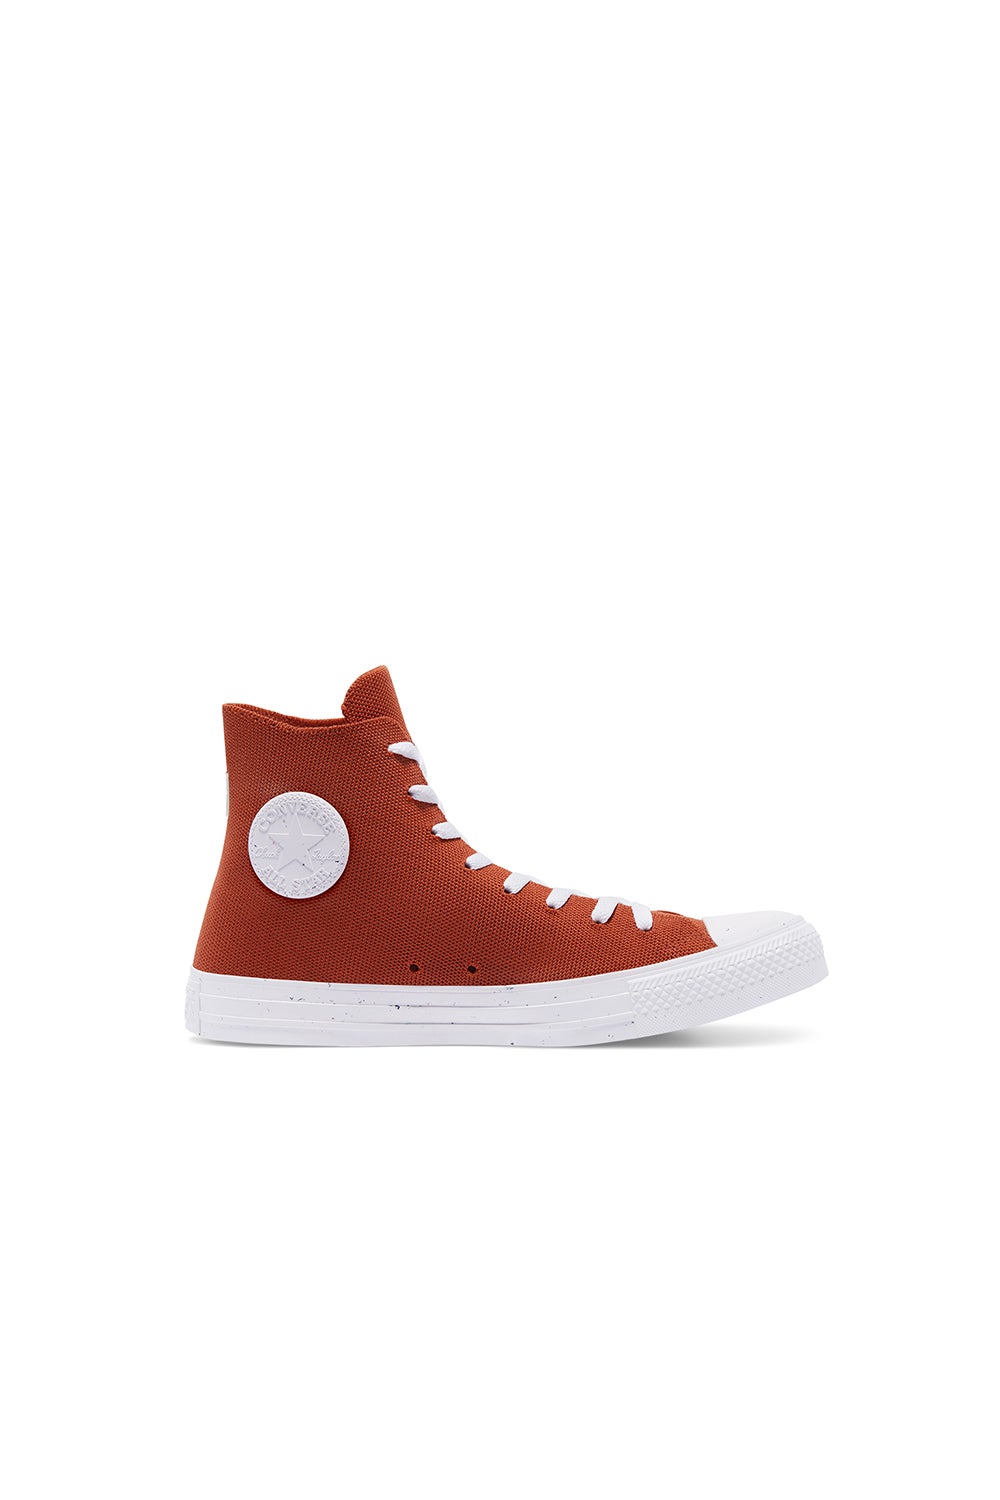 Converse Chuck Taylor All Star Renew Knit High Top Red Bark